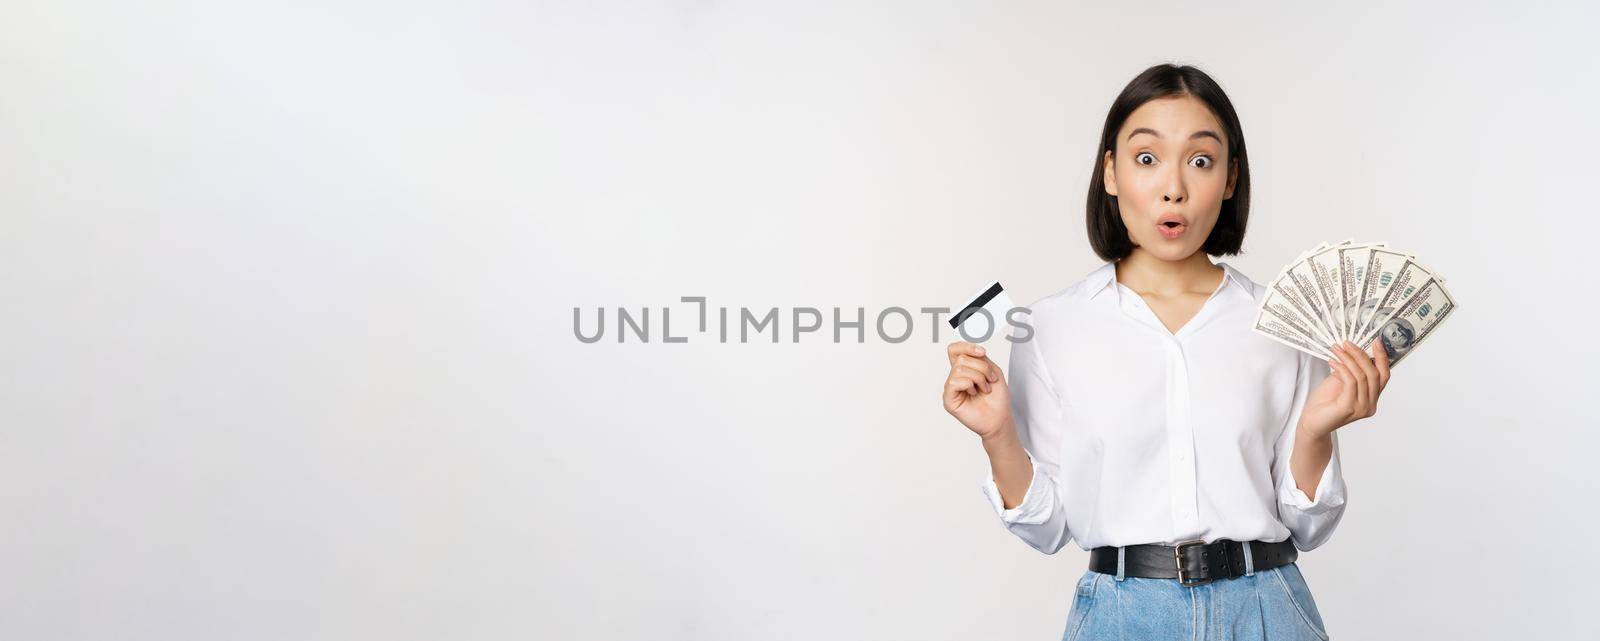 Finance and money concept. Happy young asian woman dancing with cash and credit card, smiling pleased, posing against white studio background.